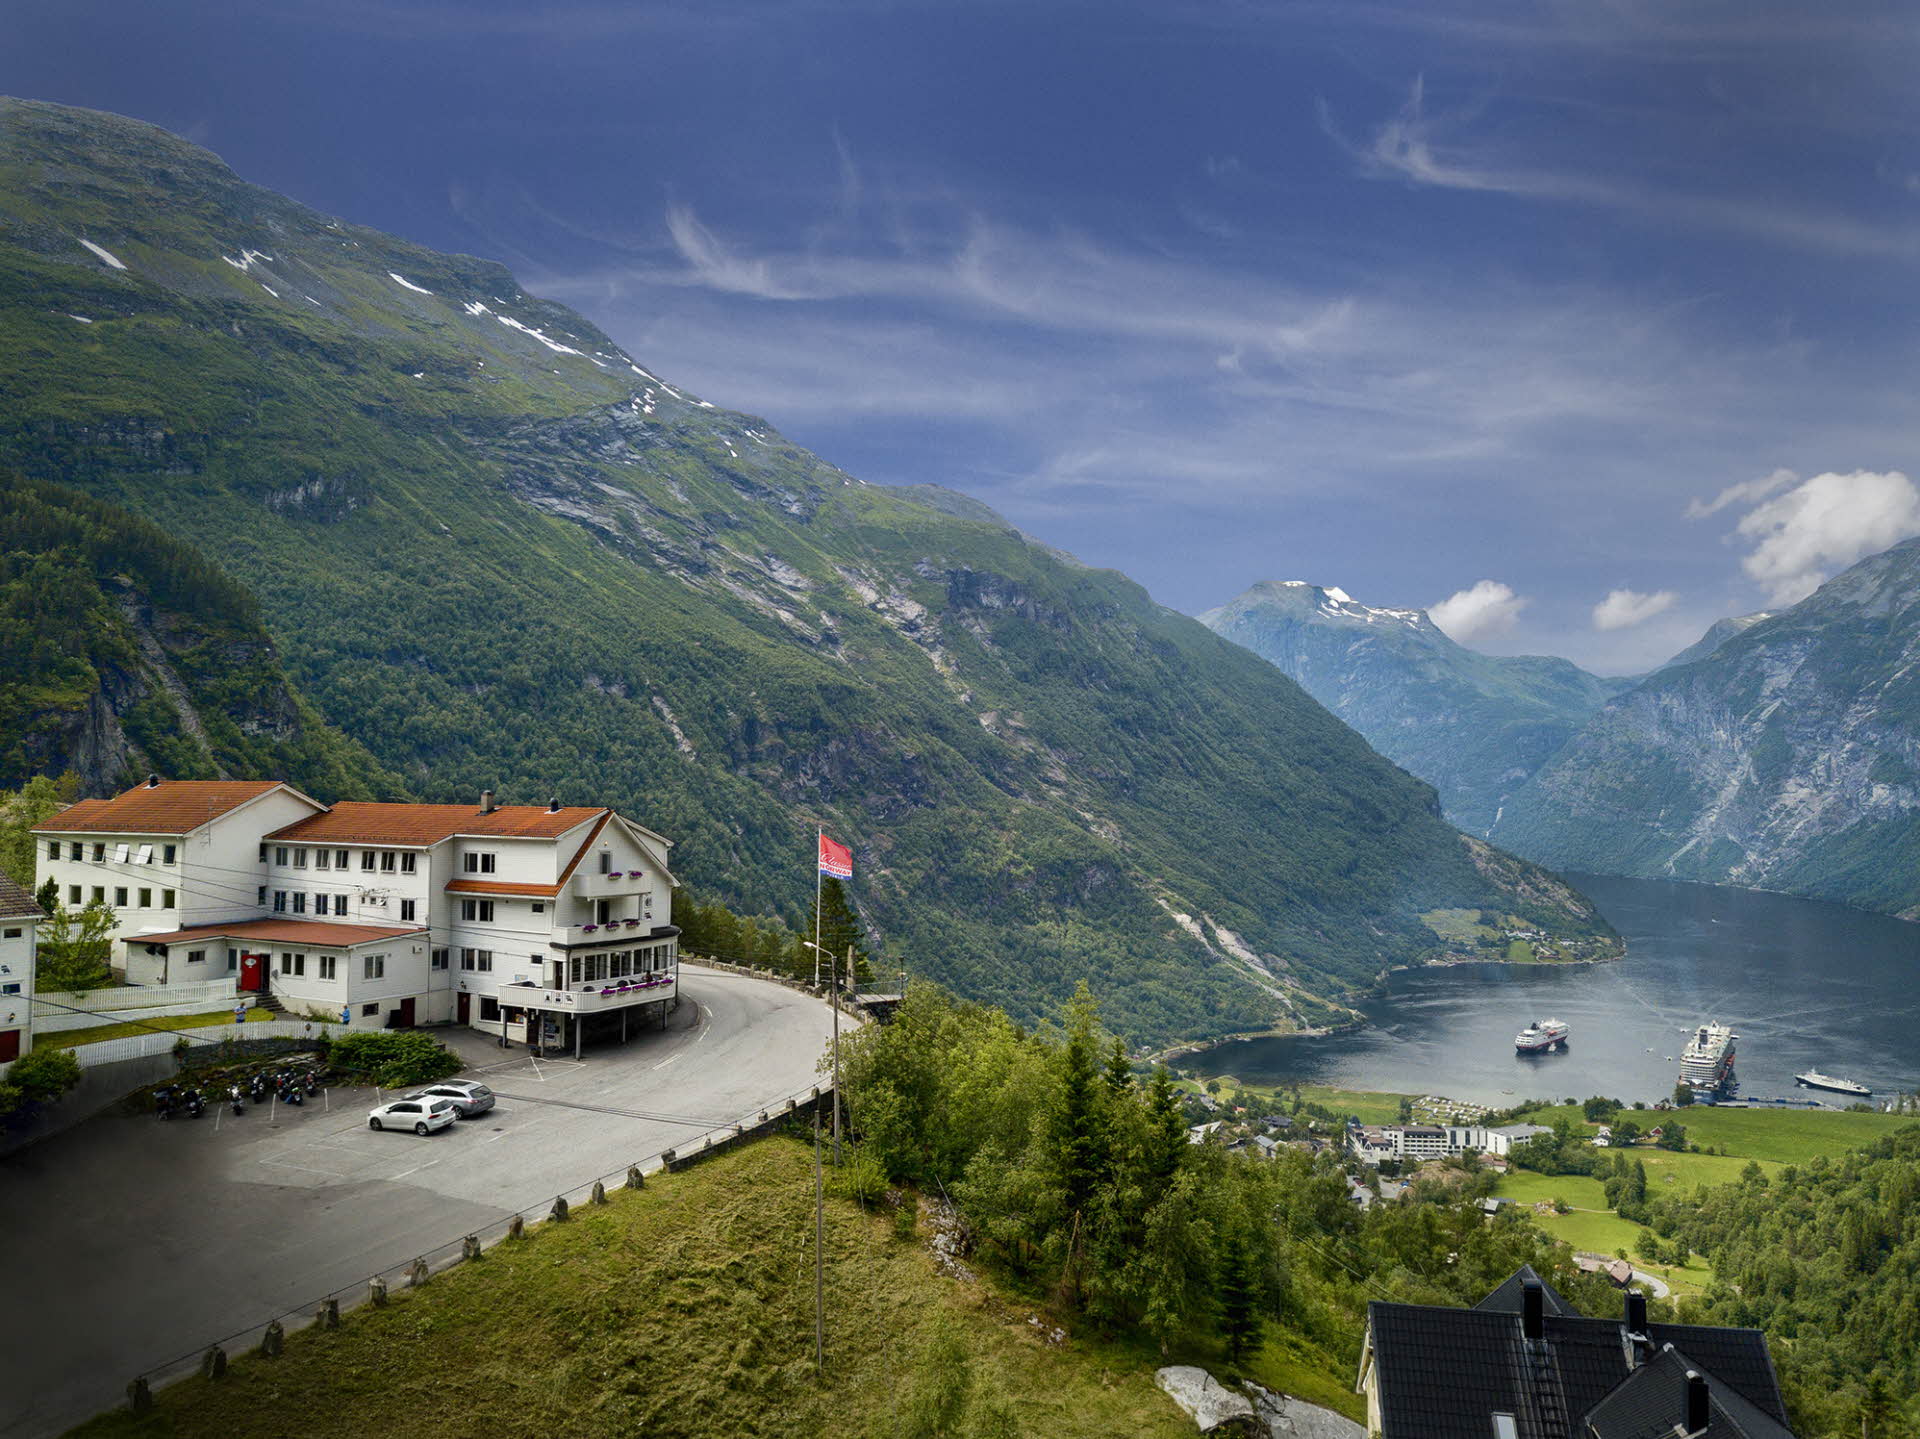 View of Hotel Utsikten above Geiranger and the fjord. Mountains, blue sky and green forest.